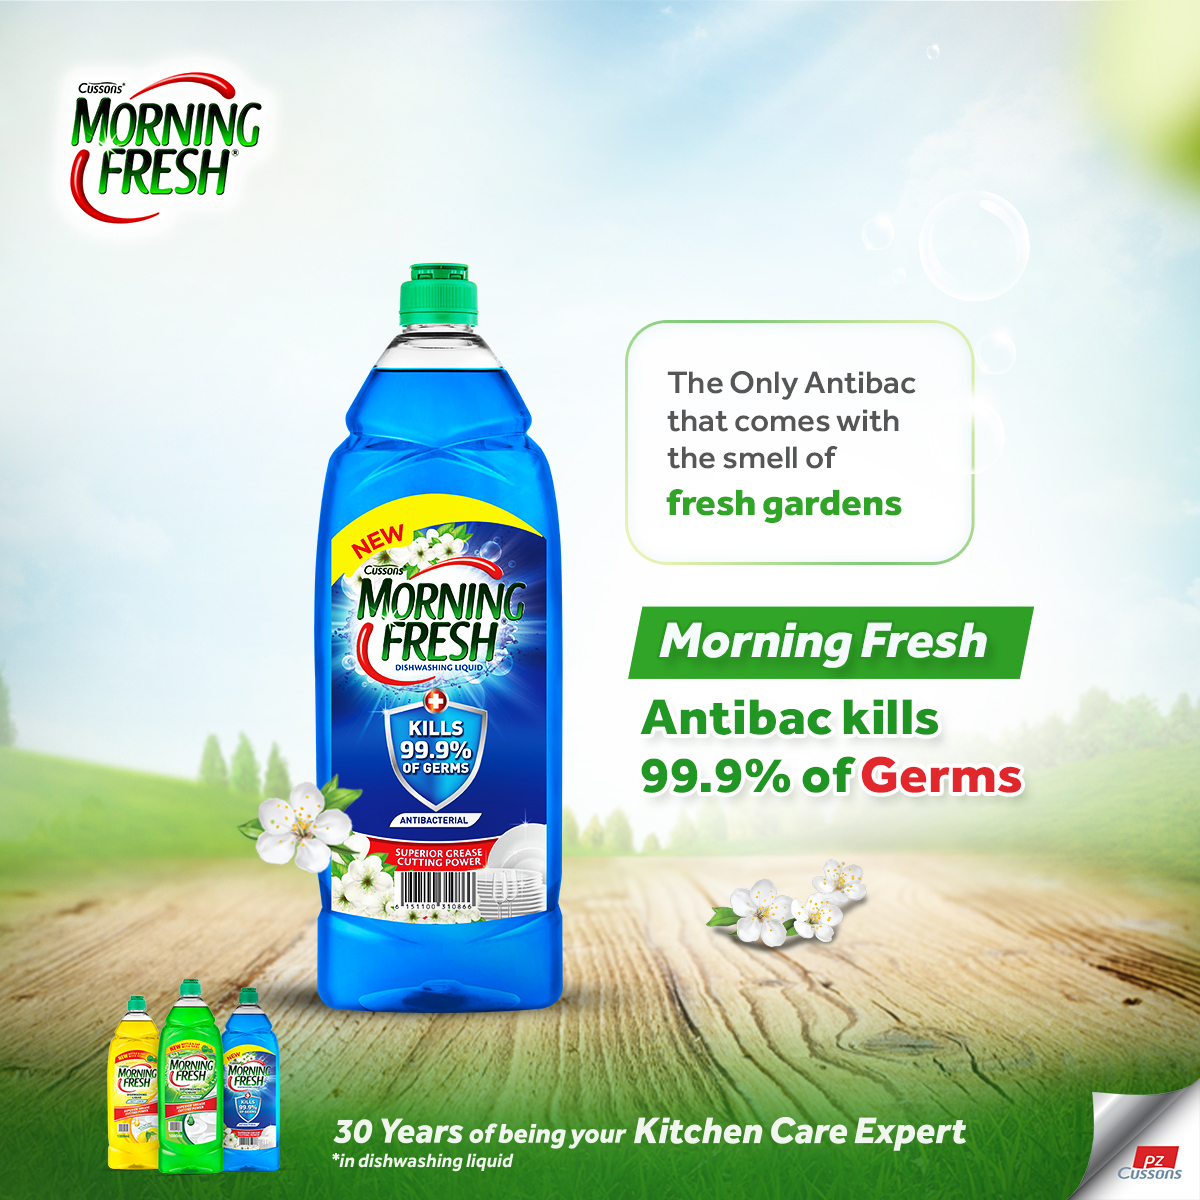 Who says kitchen counters don’t love flowers for Vals? Love up on your kitchen this month by trying out a bottle or two of Morning Fresh Apple Blossom Fragrant Antibac.
#KitchenCareExpert #CaringFortheCaregiver #MorningFresh